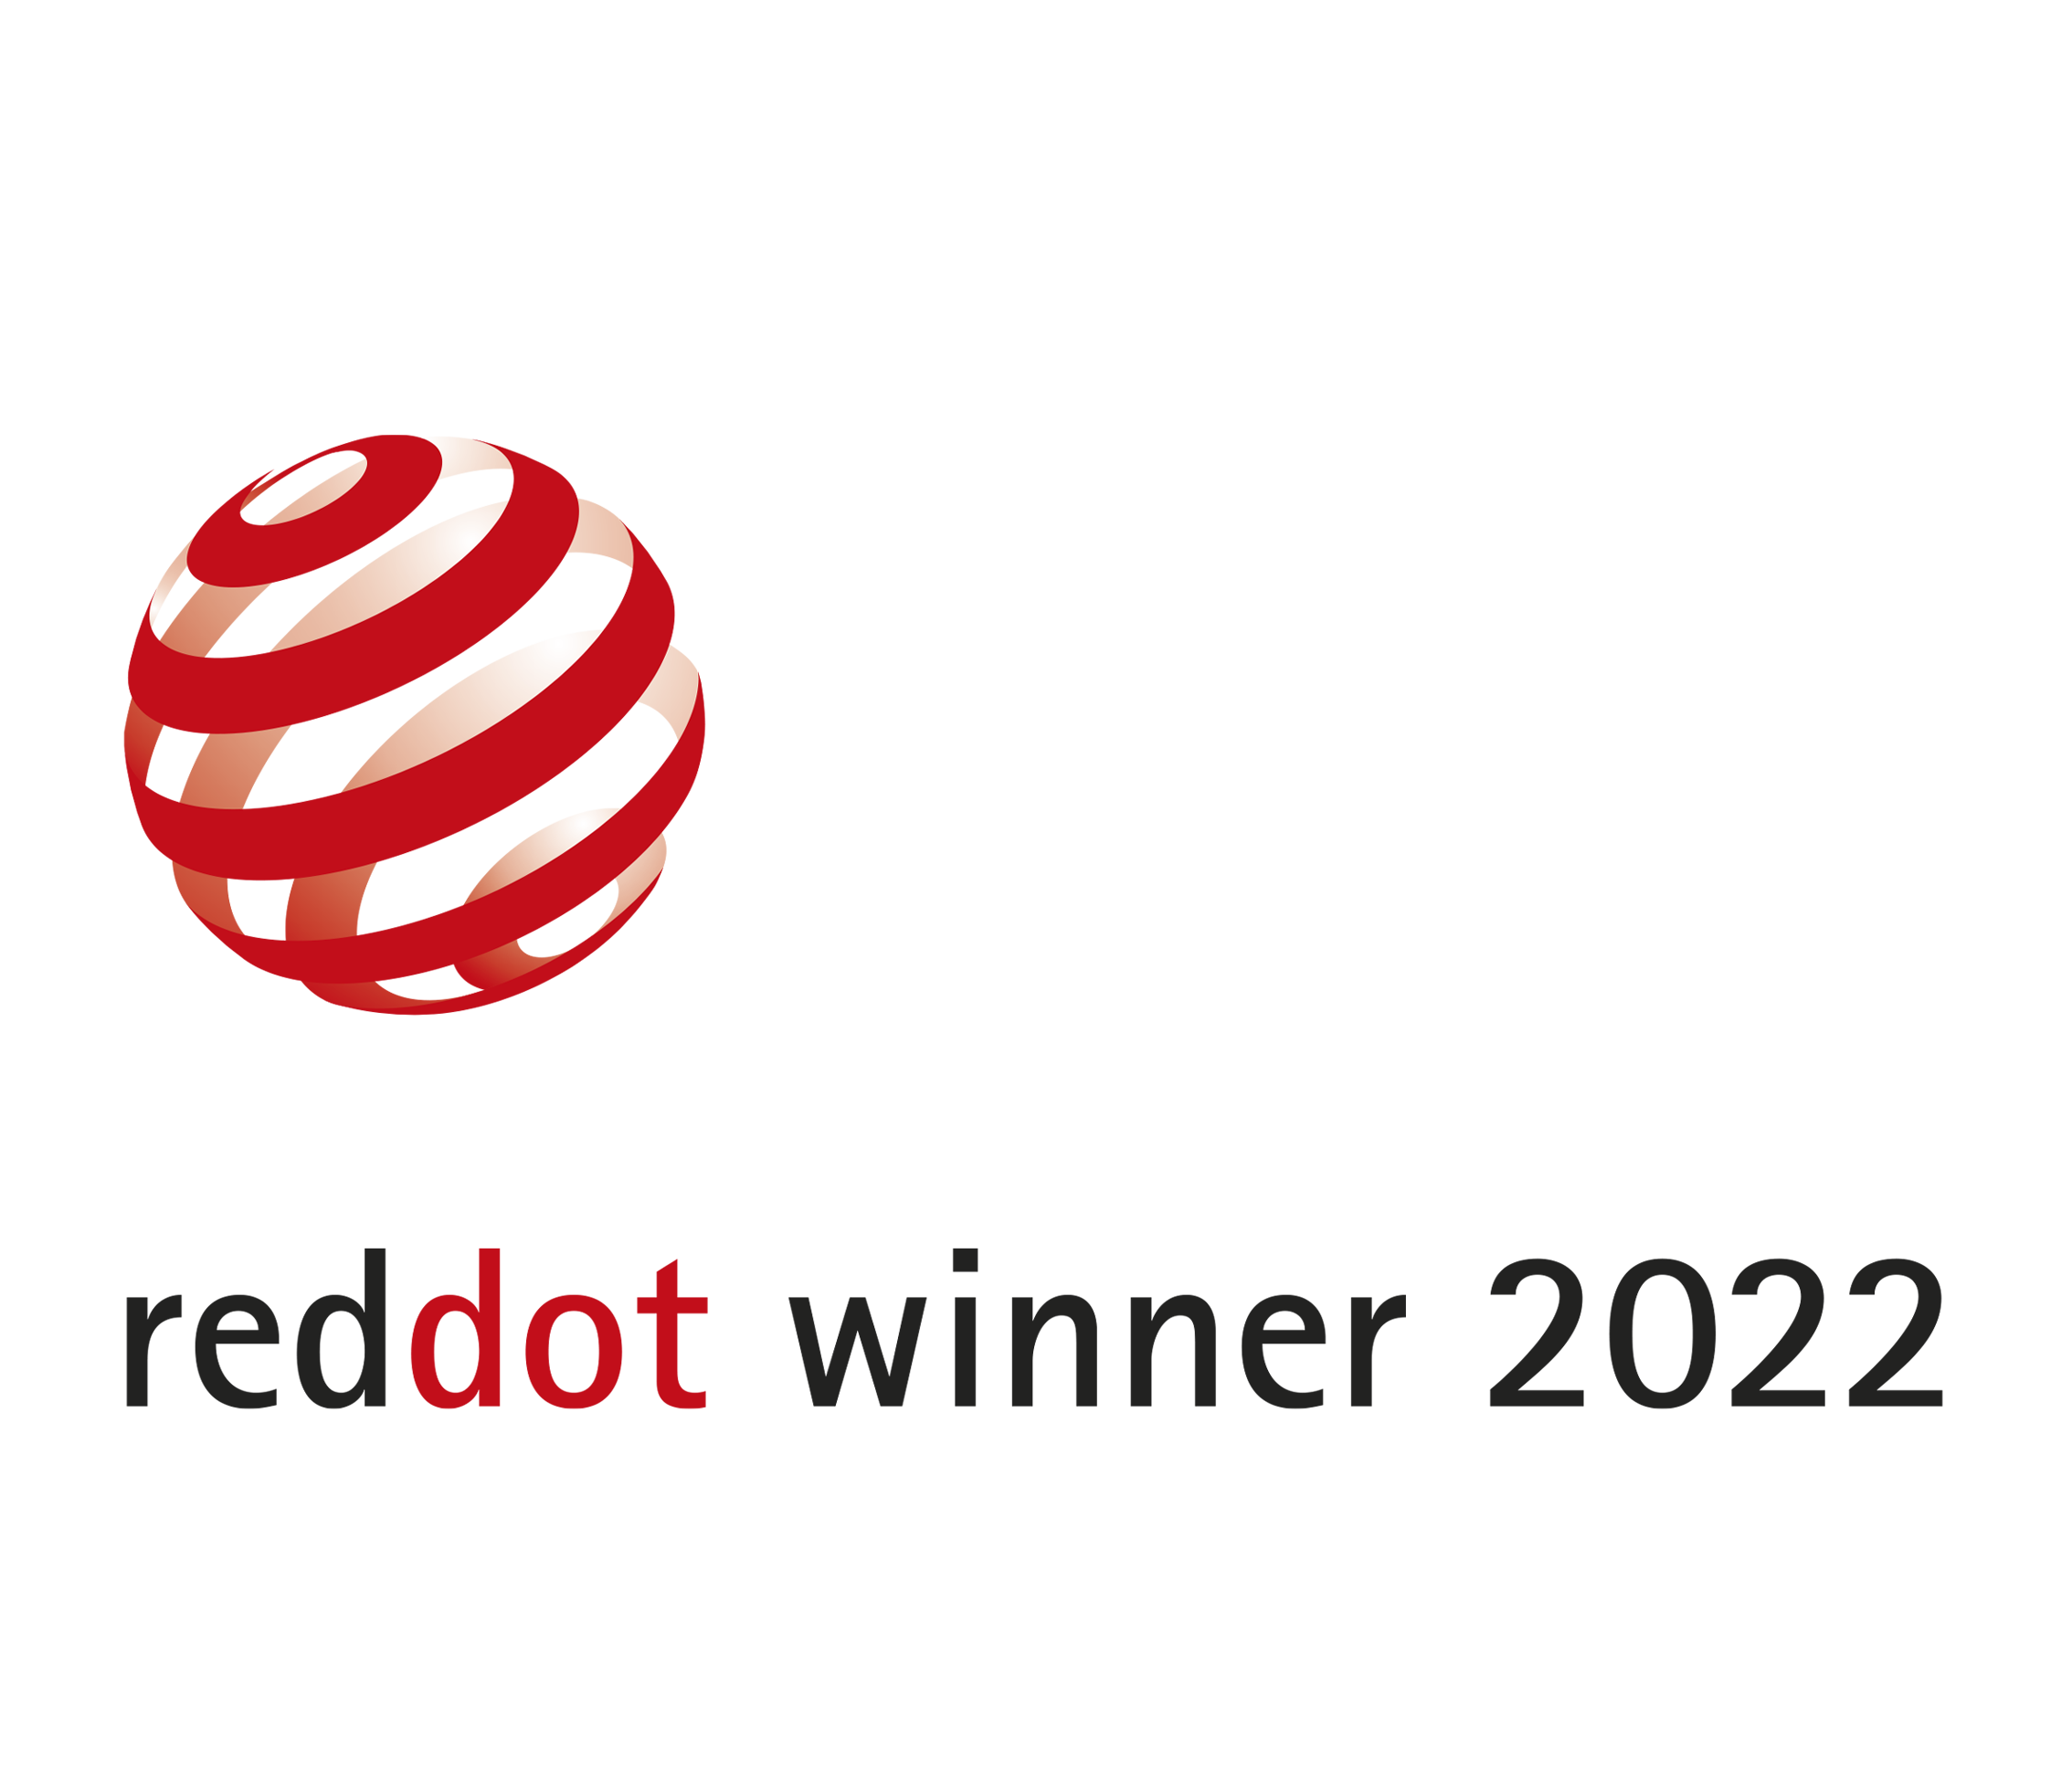 Red_dot2022_ok.png (222 KB)